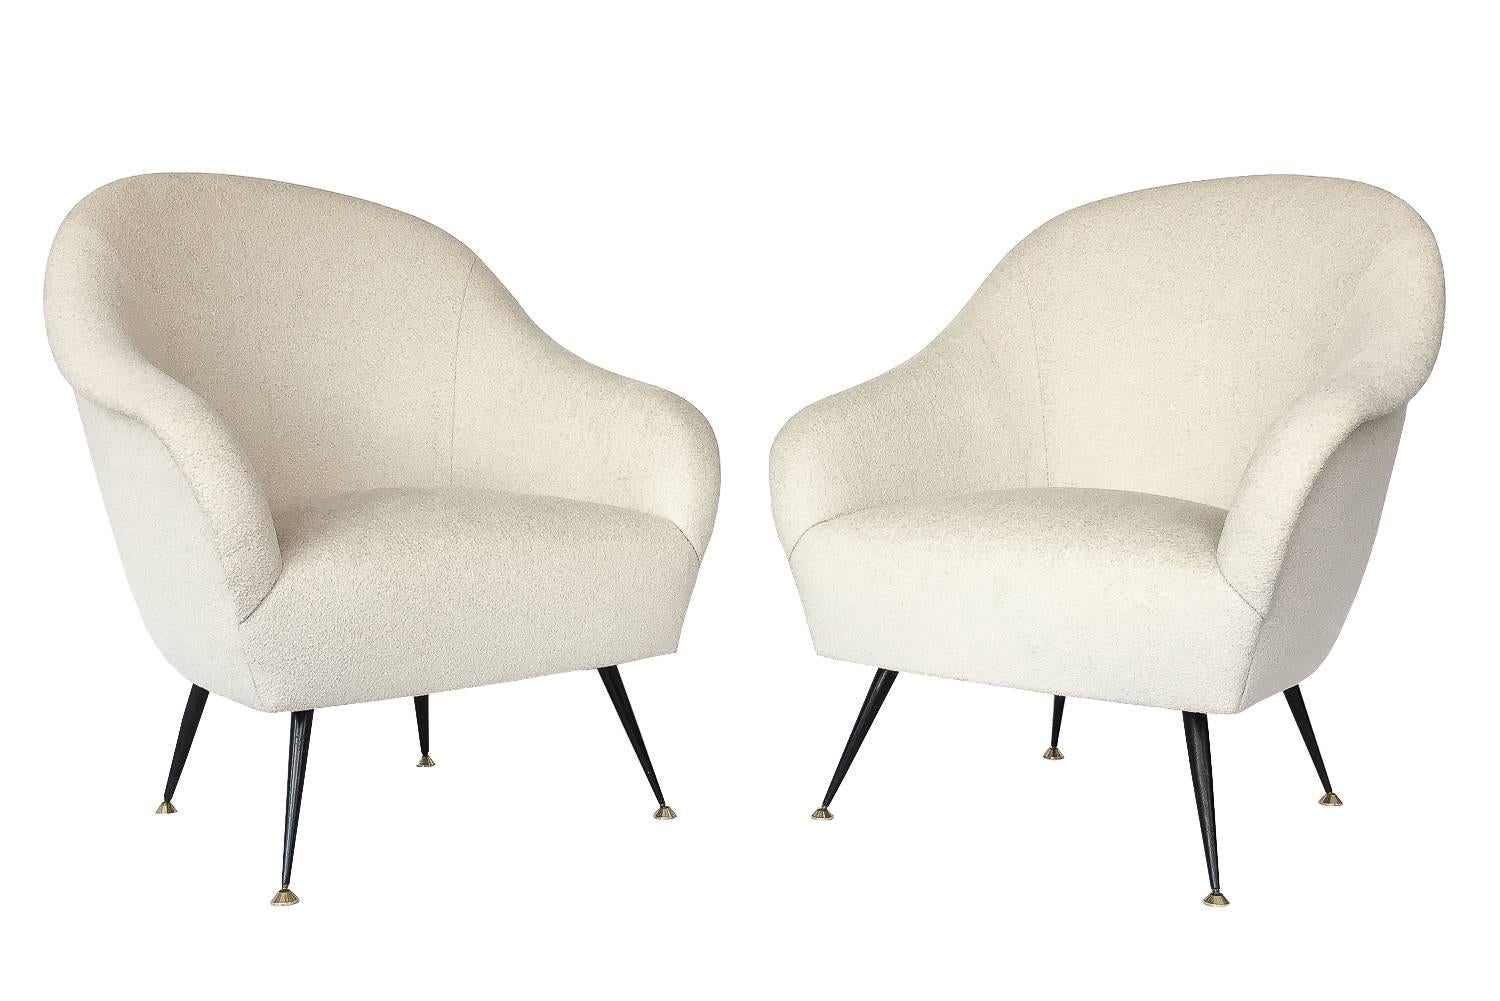 Pair of Antonio Gorgone Italian lounge chairs with metal stiletto legs. Newly upholstered in a bone colored chenille fabric. Curvaceous design with tight upholstered seat and back. Slight reveal of curved armrest. Black painted angled metal legs